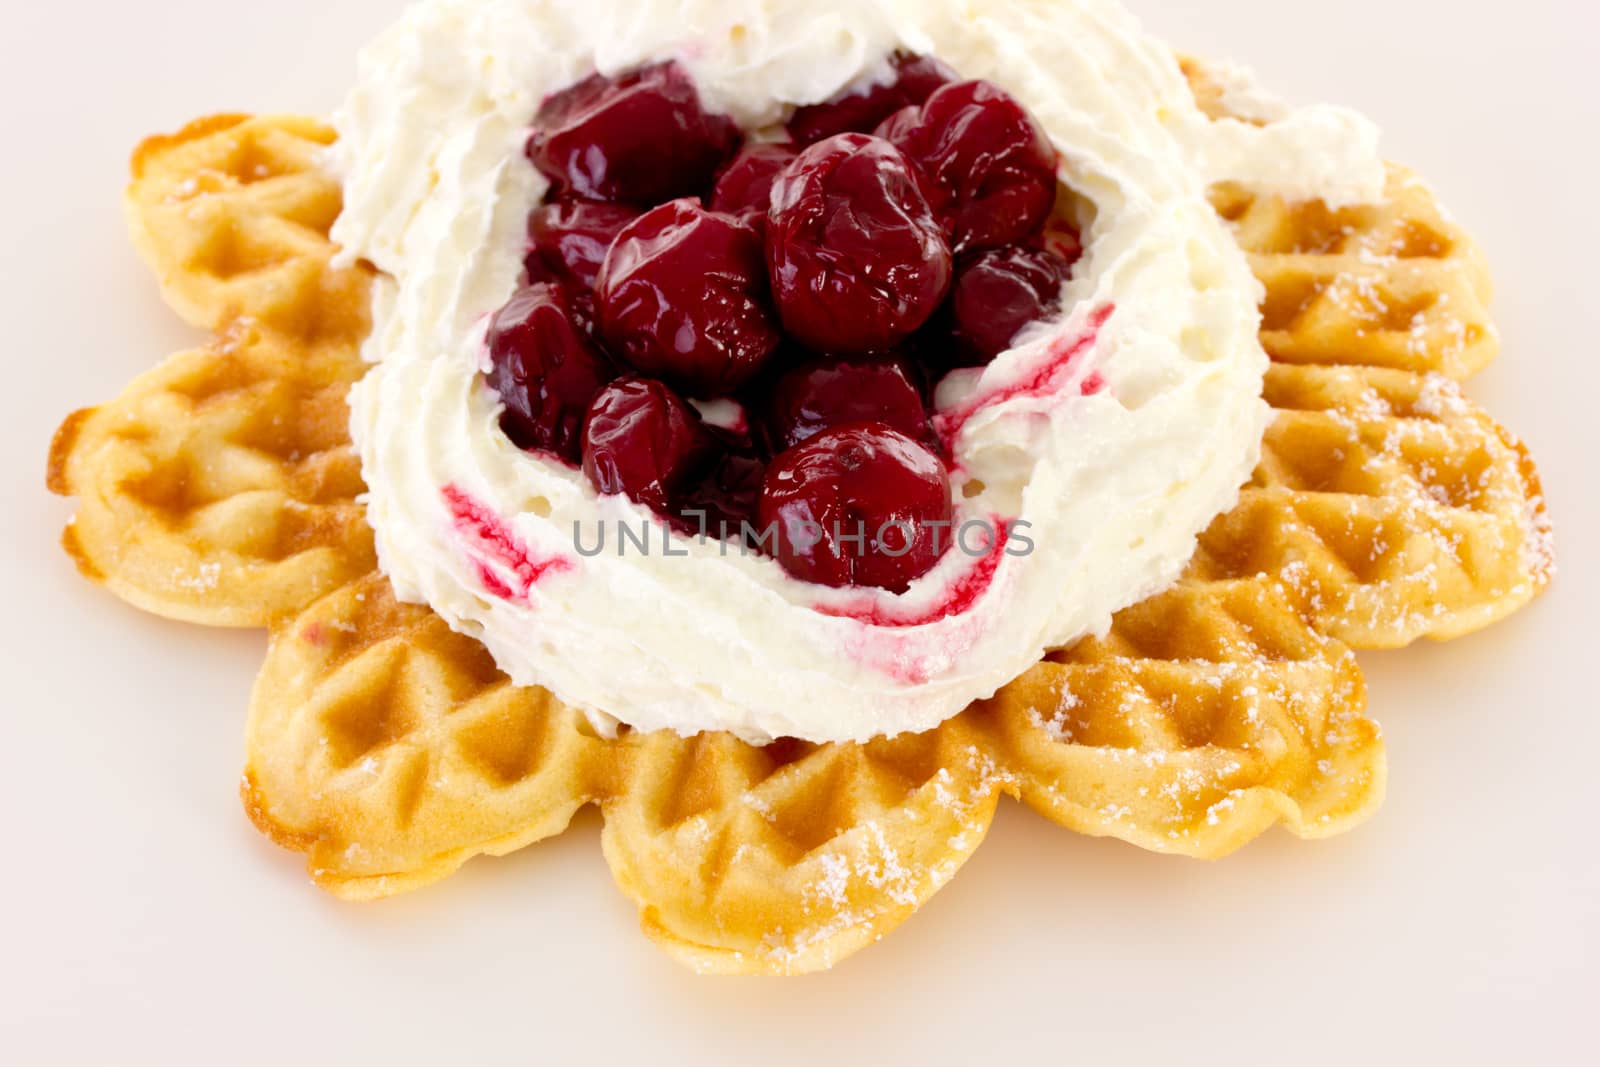 Cream and sour cherries on fresh baked waffle